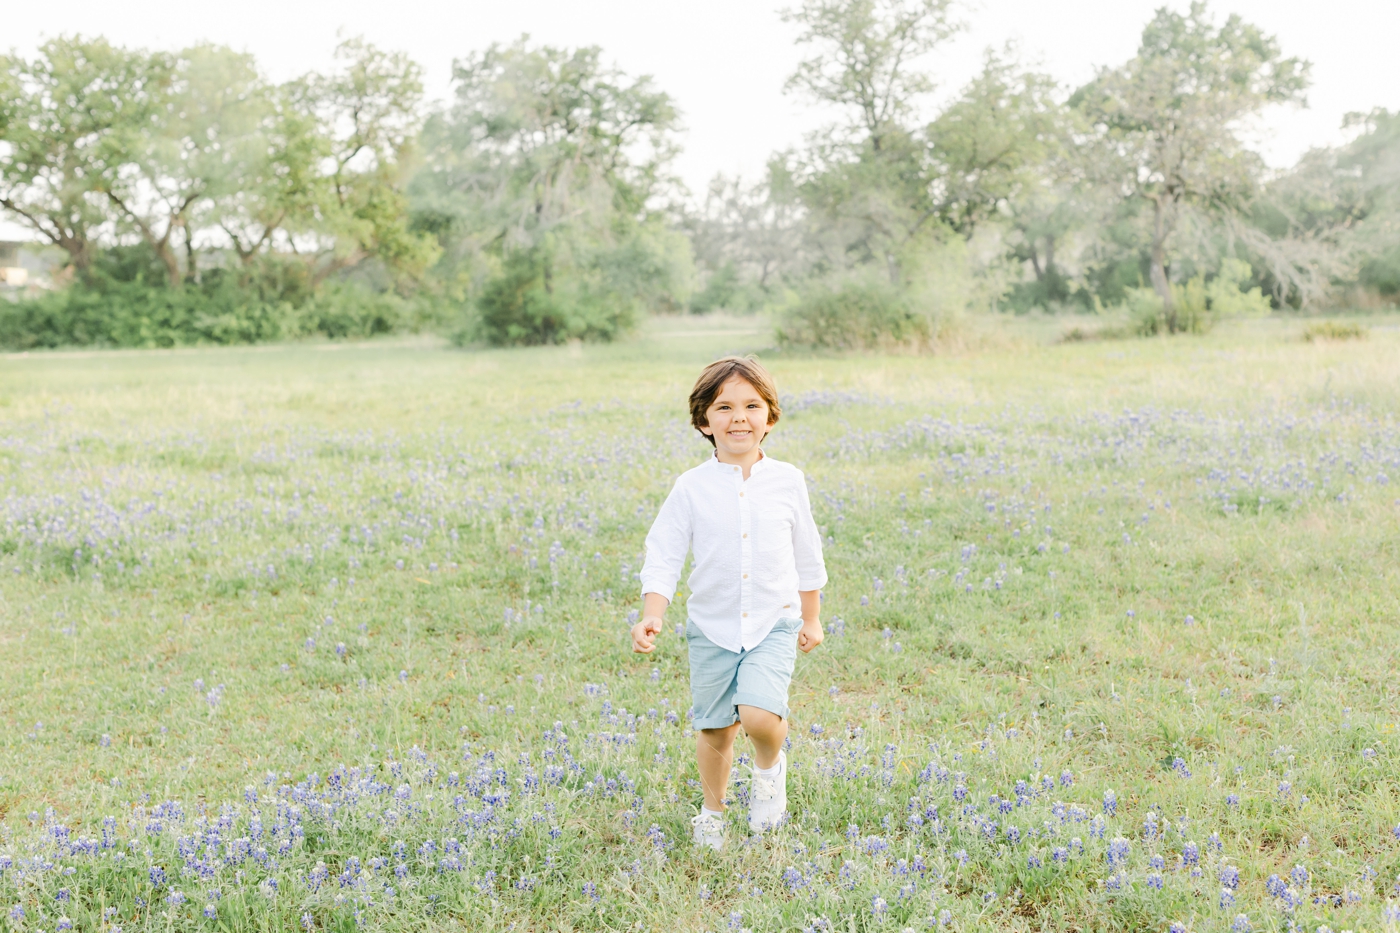 Child playing in field of wildflowers near Cedar Park TX. Photo by Sana Ahmed Photography.